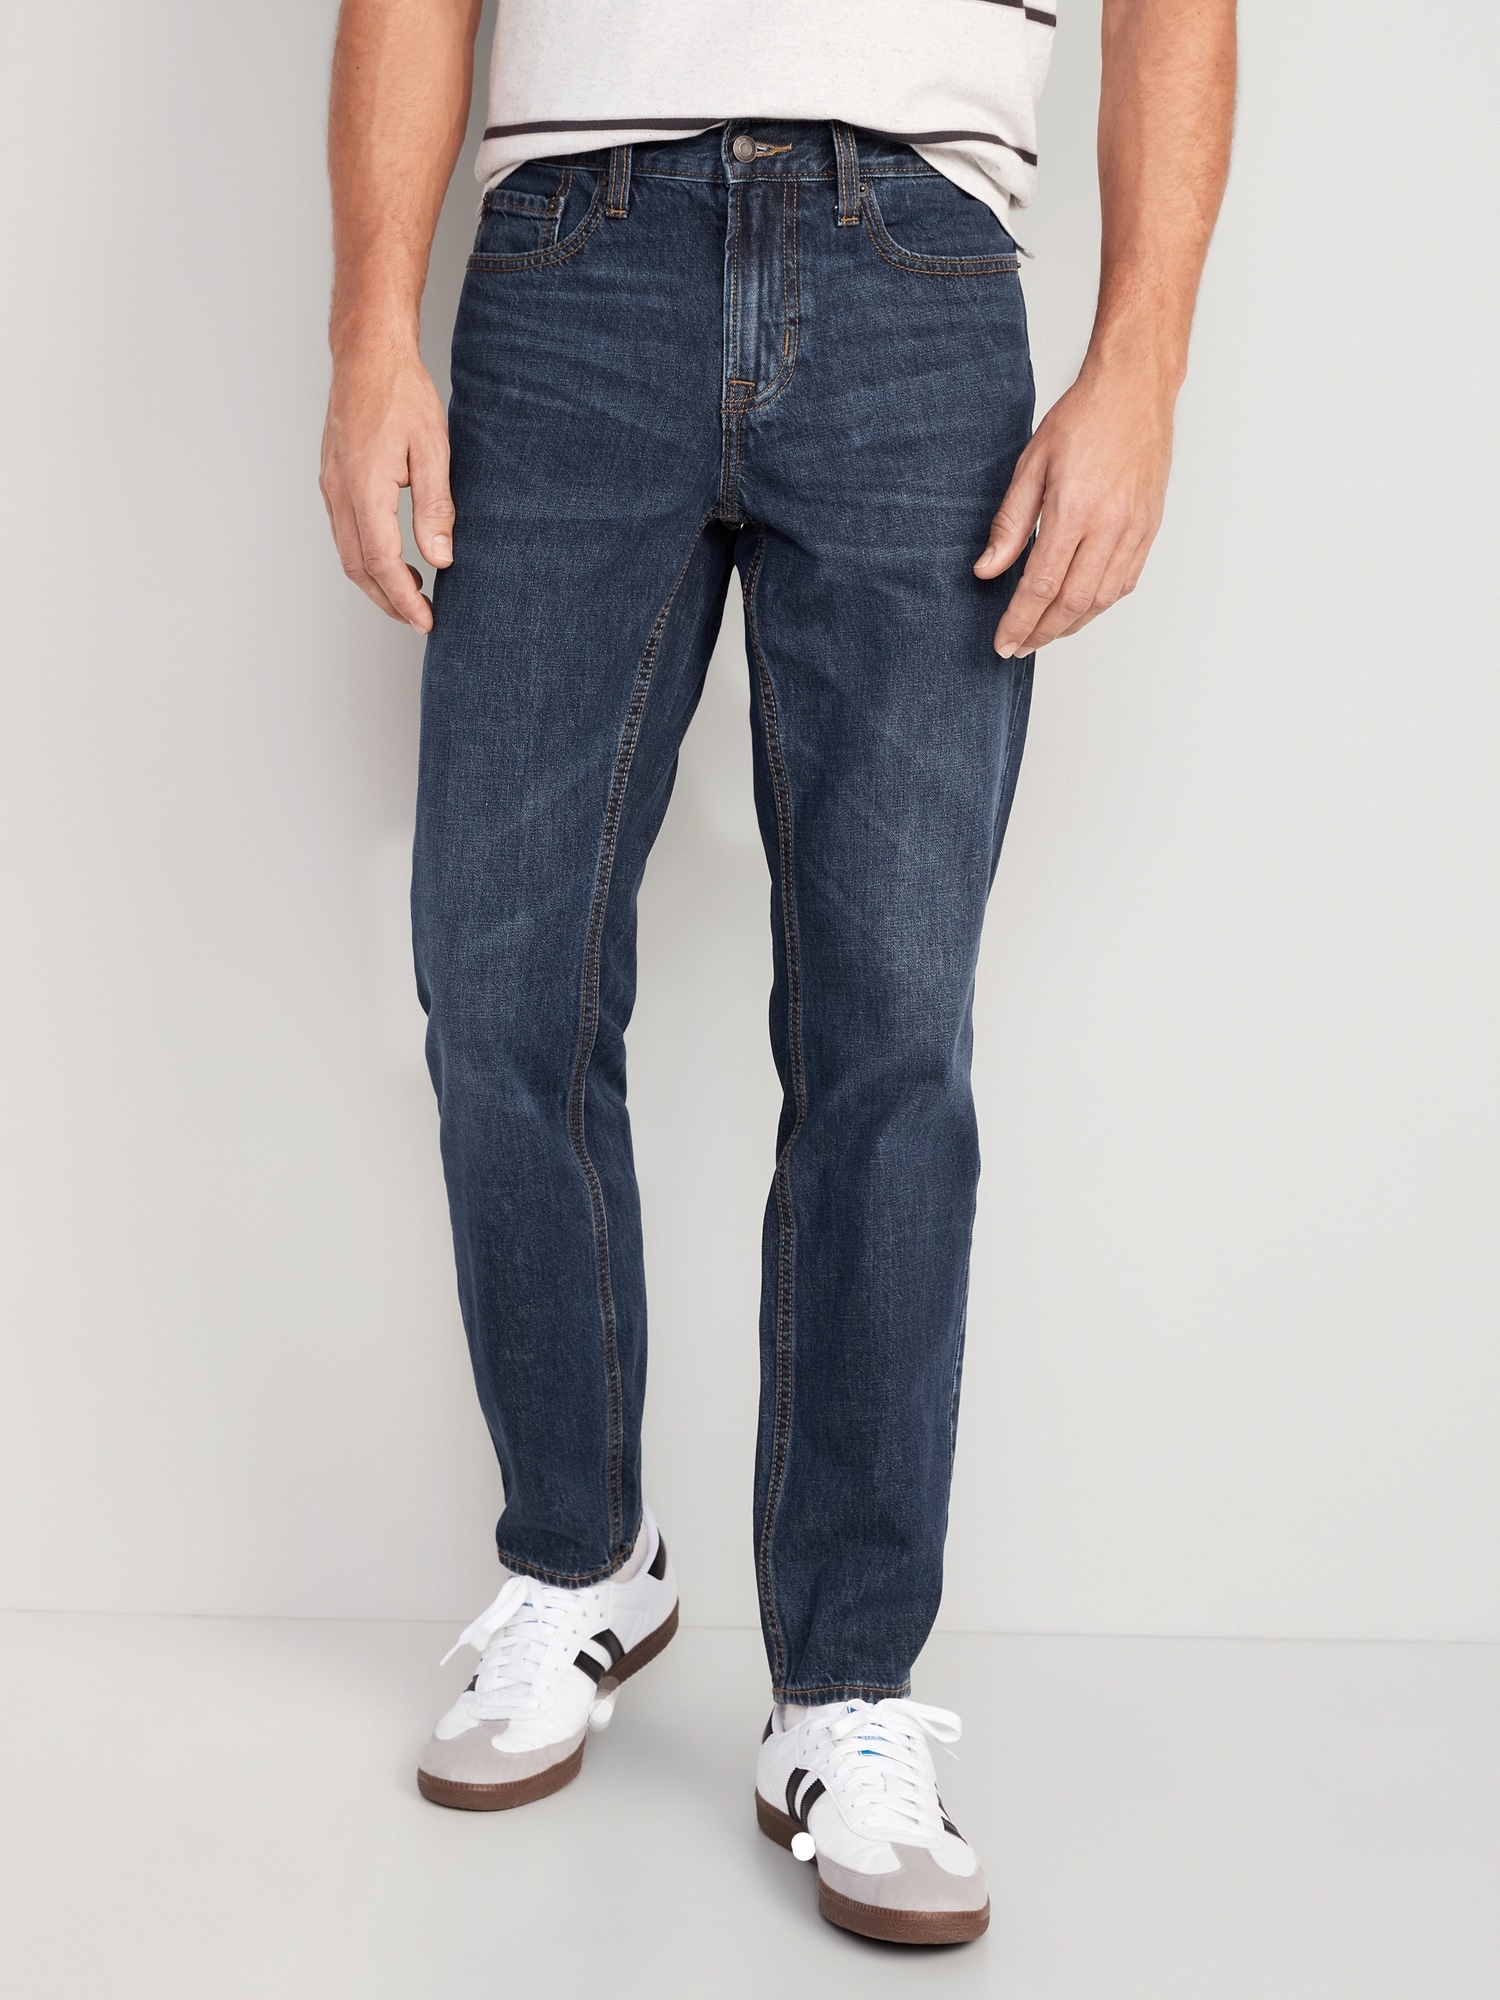 Wow Athletic Taper Non-Stretch Jeans for Men | Old Navy